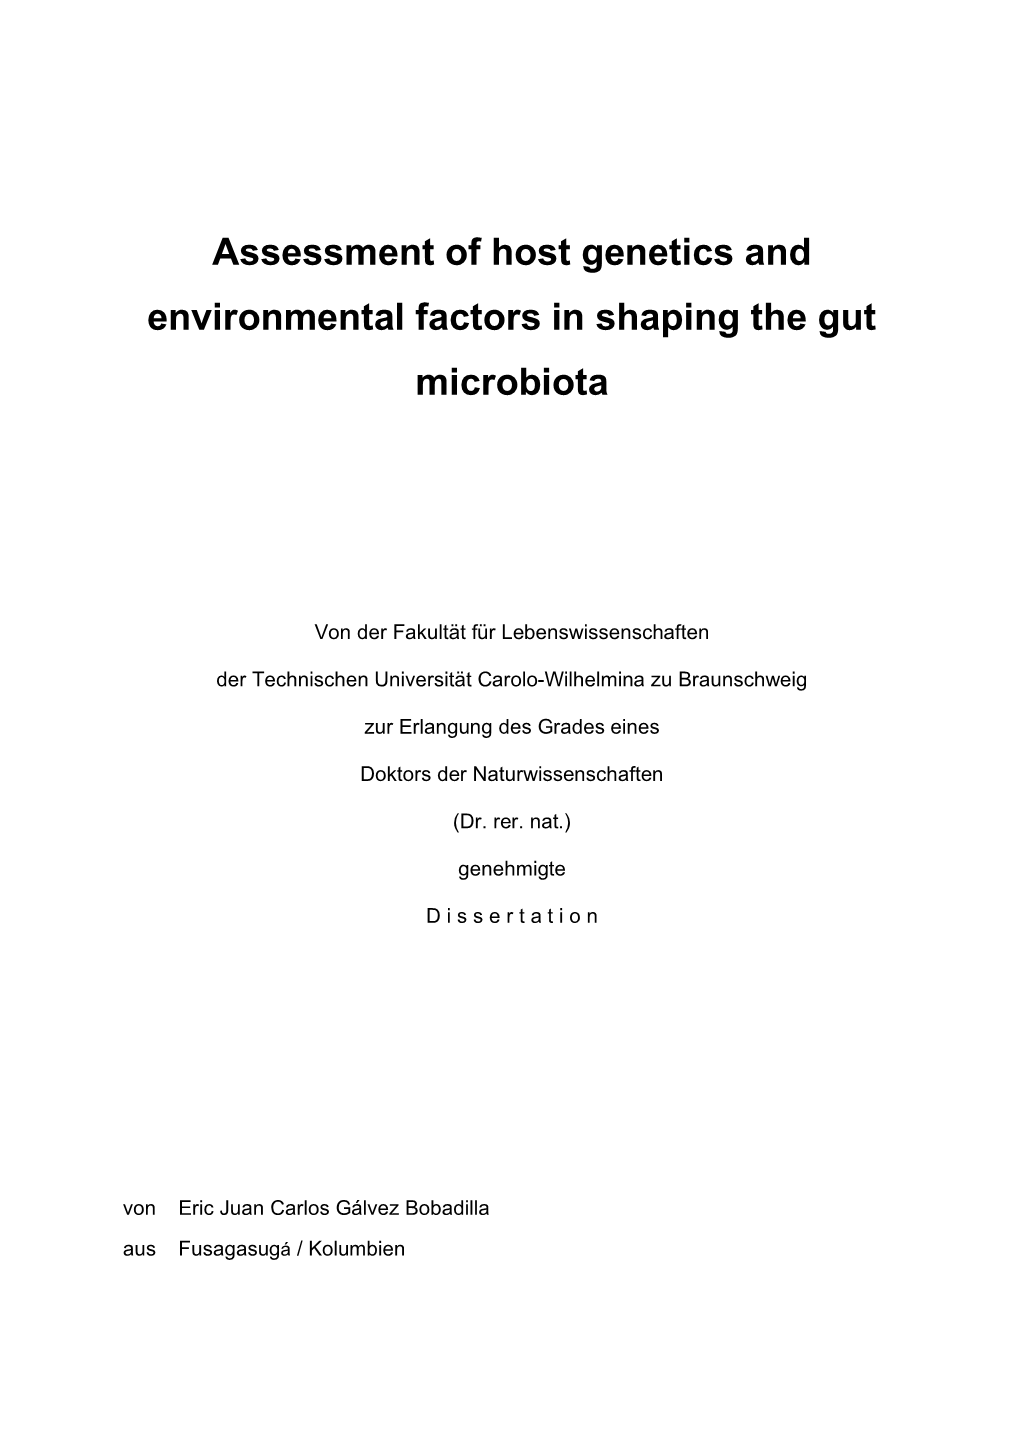 Assessment of Host Genetics and Environmental Factors in Shaping the Gut Microbiota